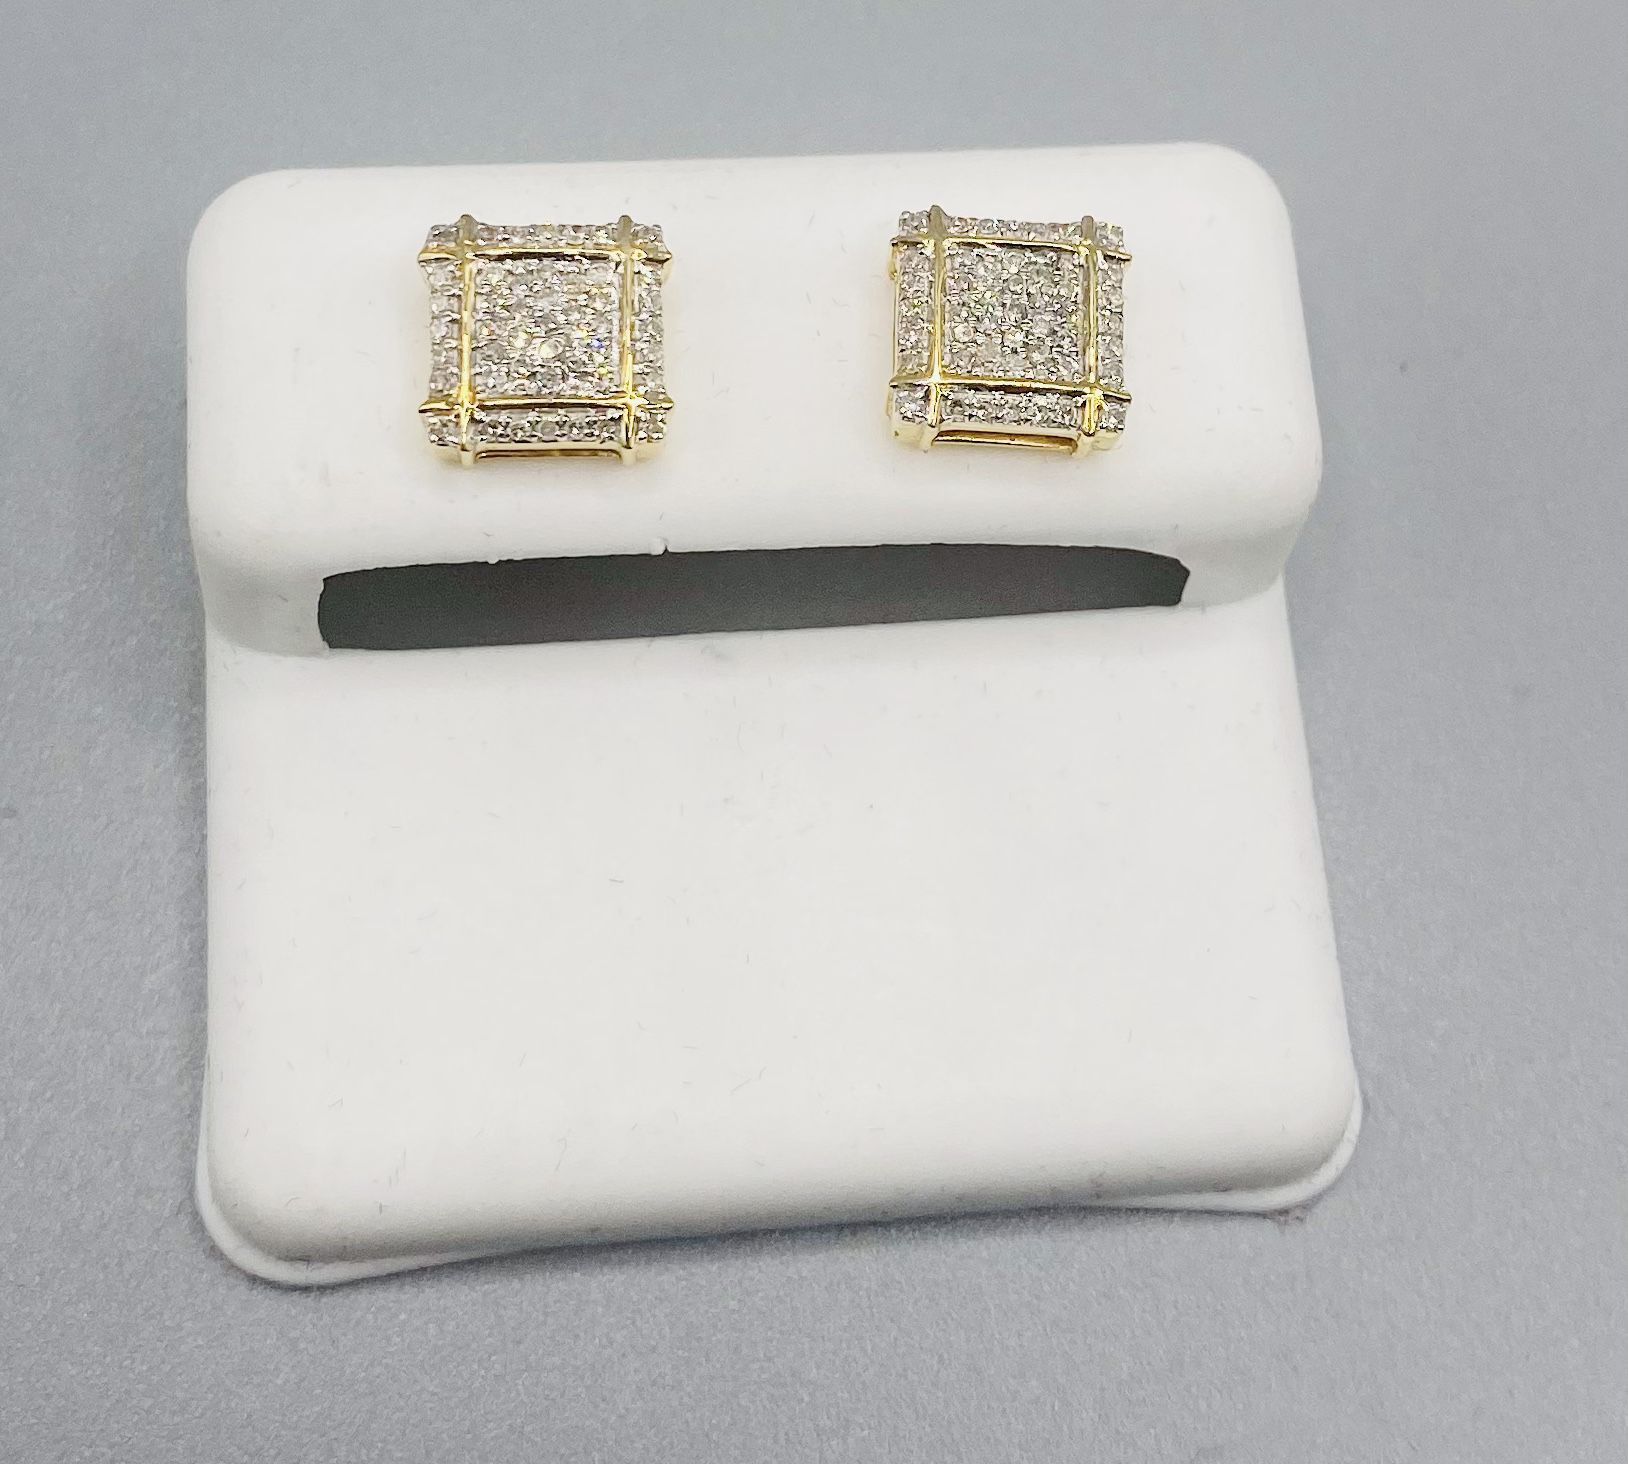 10KT Gold With Diamond Earrings 0.25 CTW